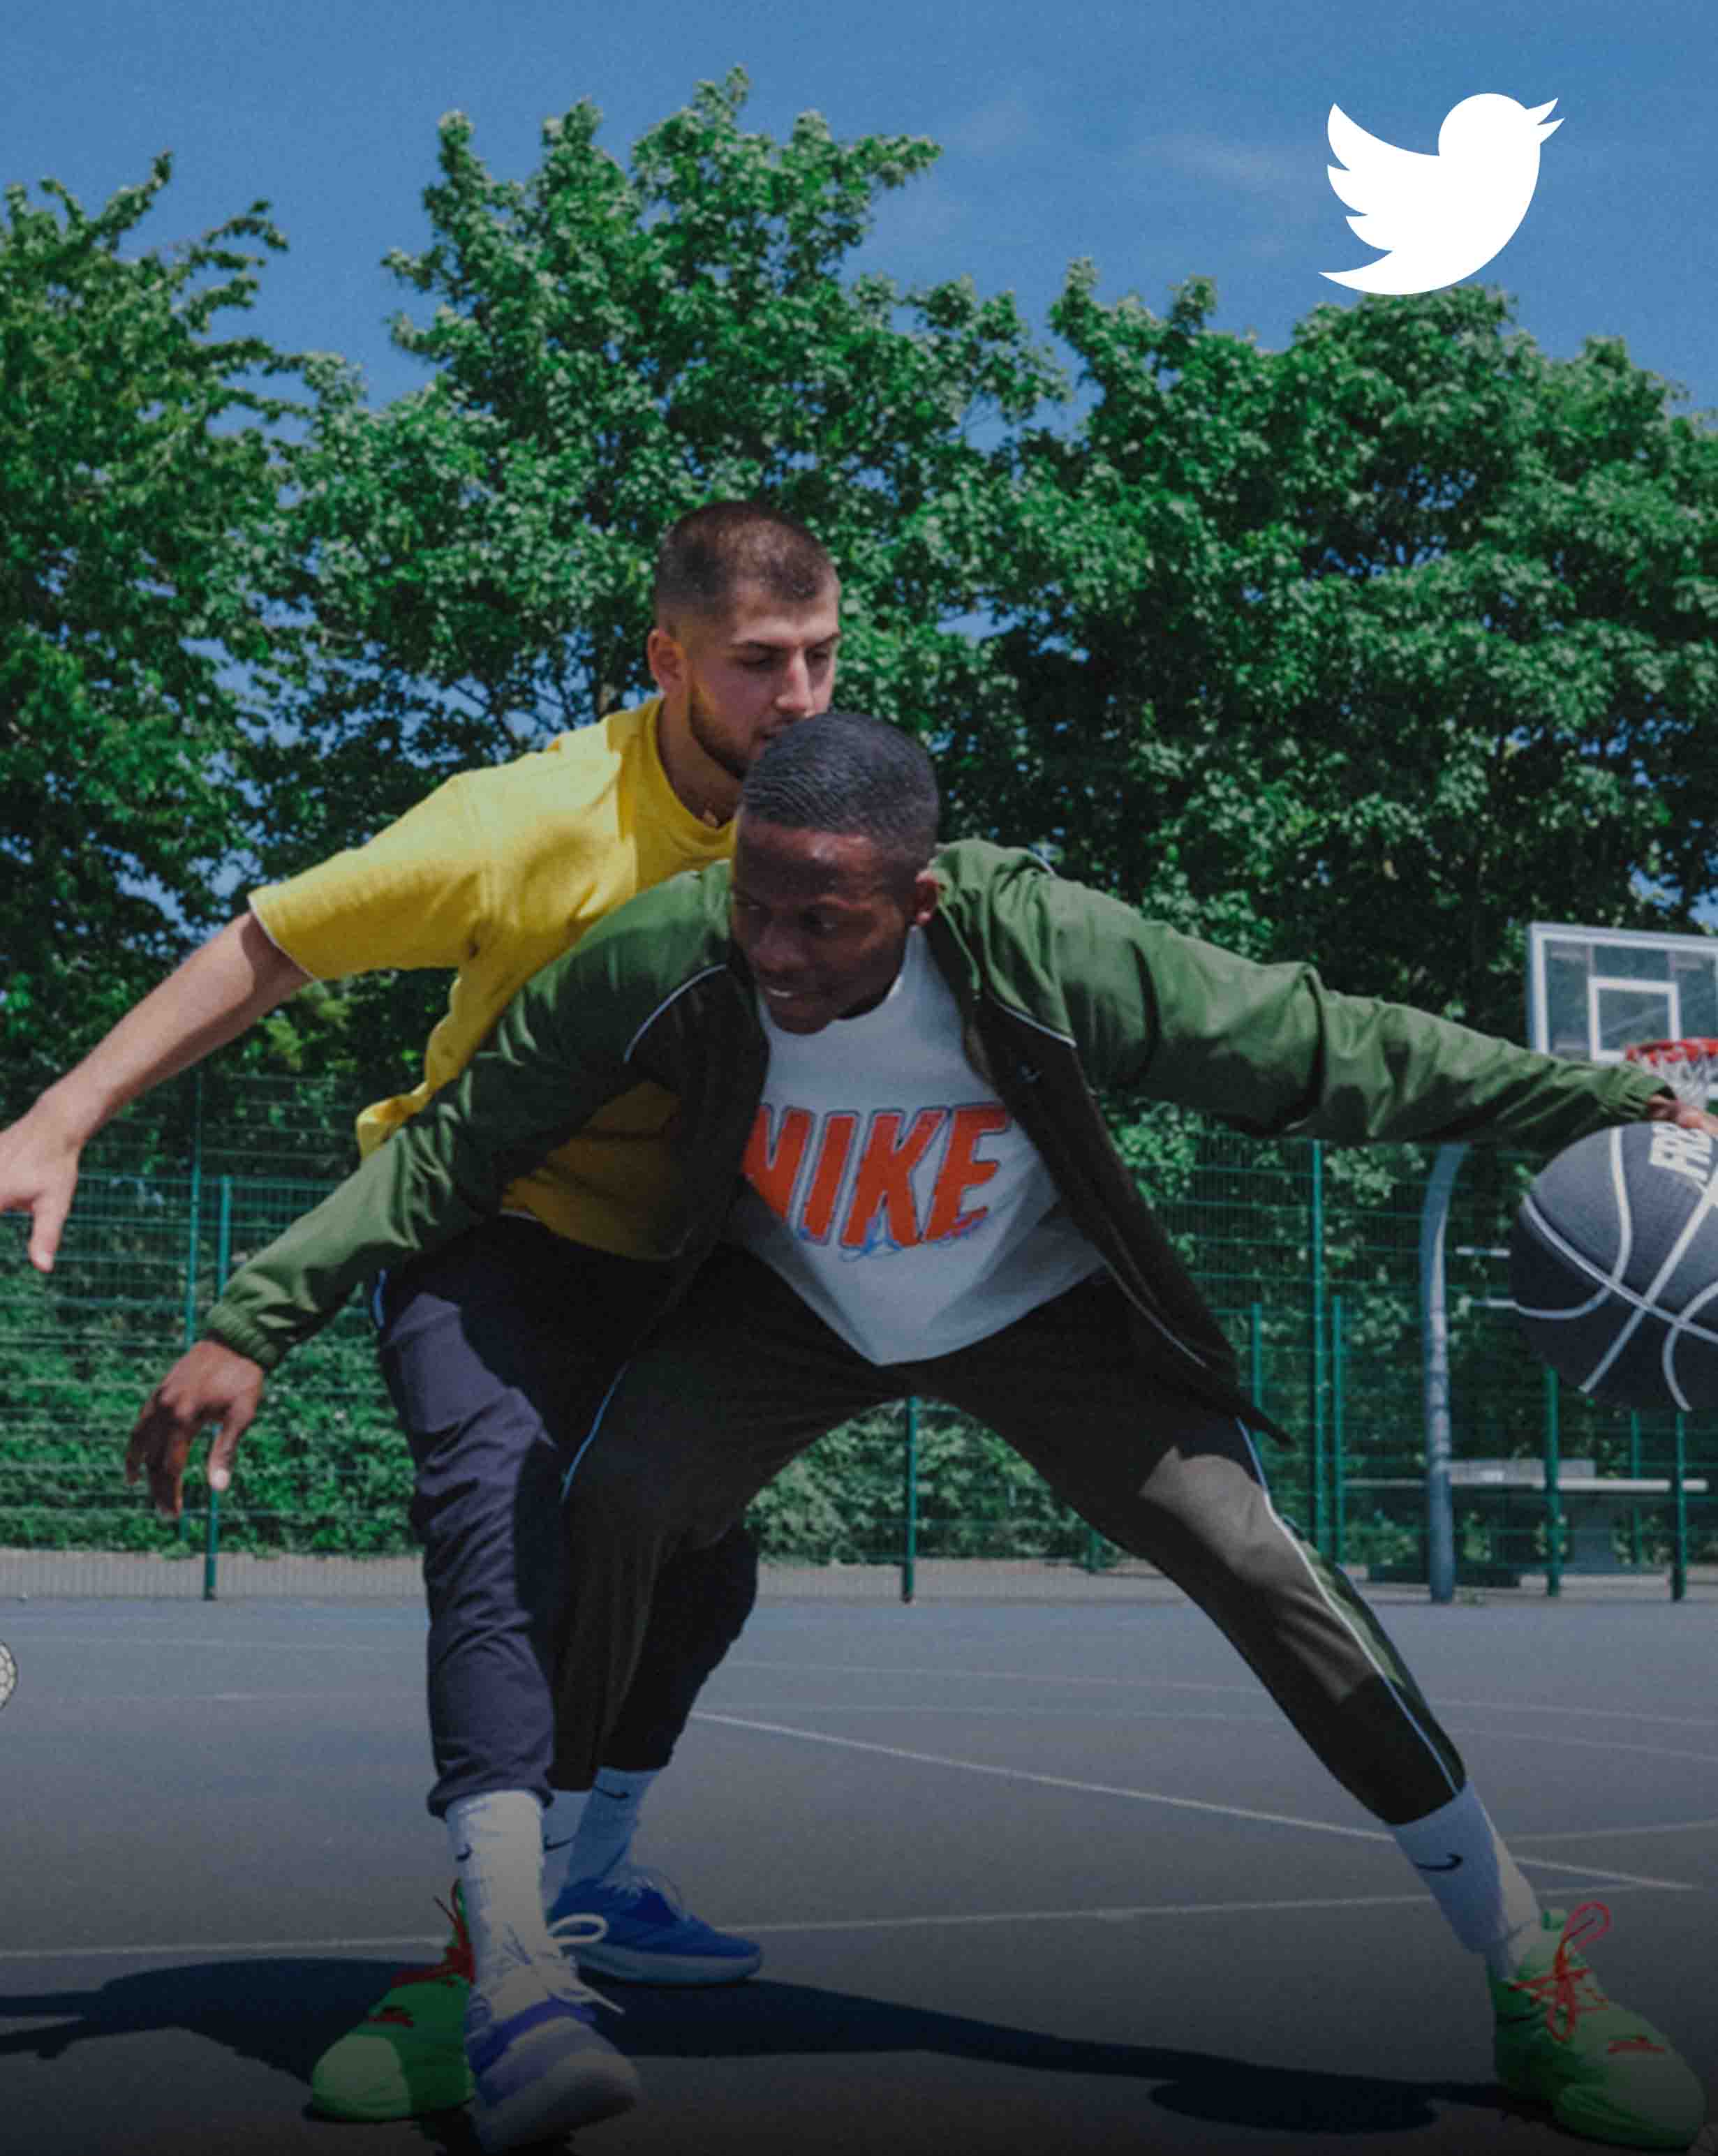 Behrad & Denzel from SBB are playing basketball together during a Nike Zoom Freak 3 photoshoot for Nike's website, after the videos SBB produced to promote Giannis Antetokounmpo's signature shoe